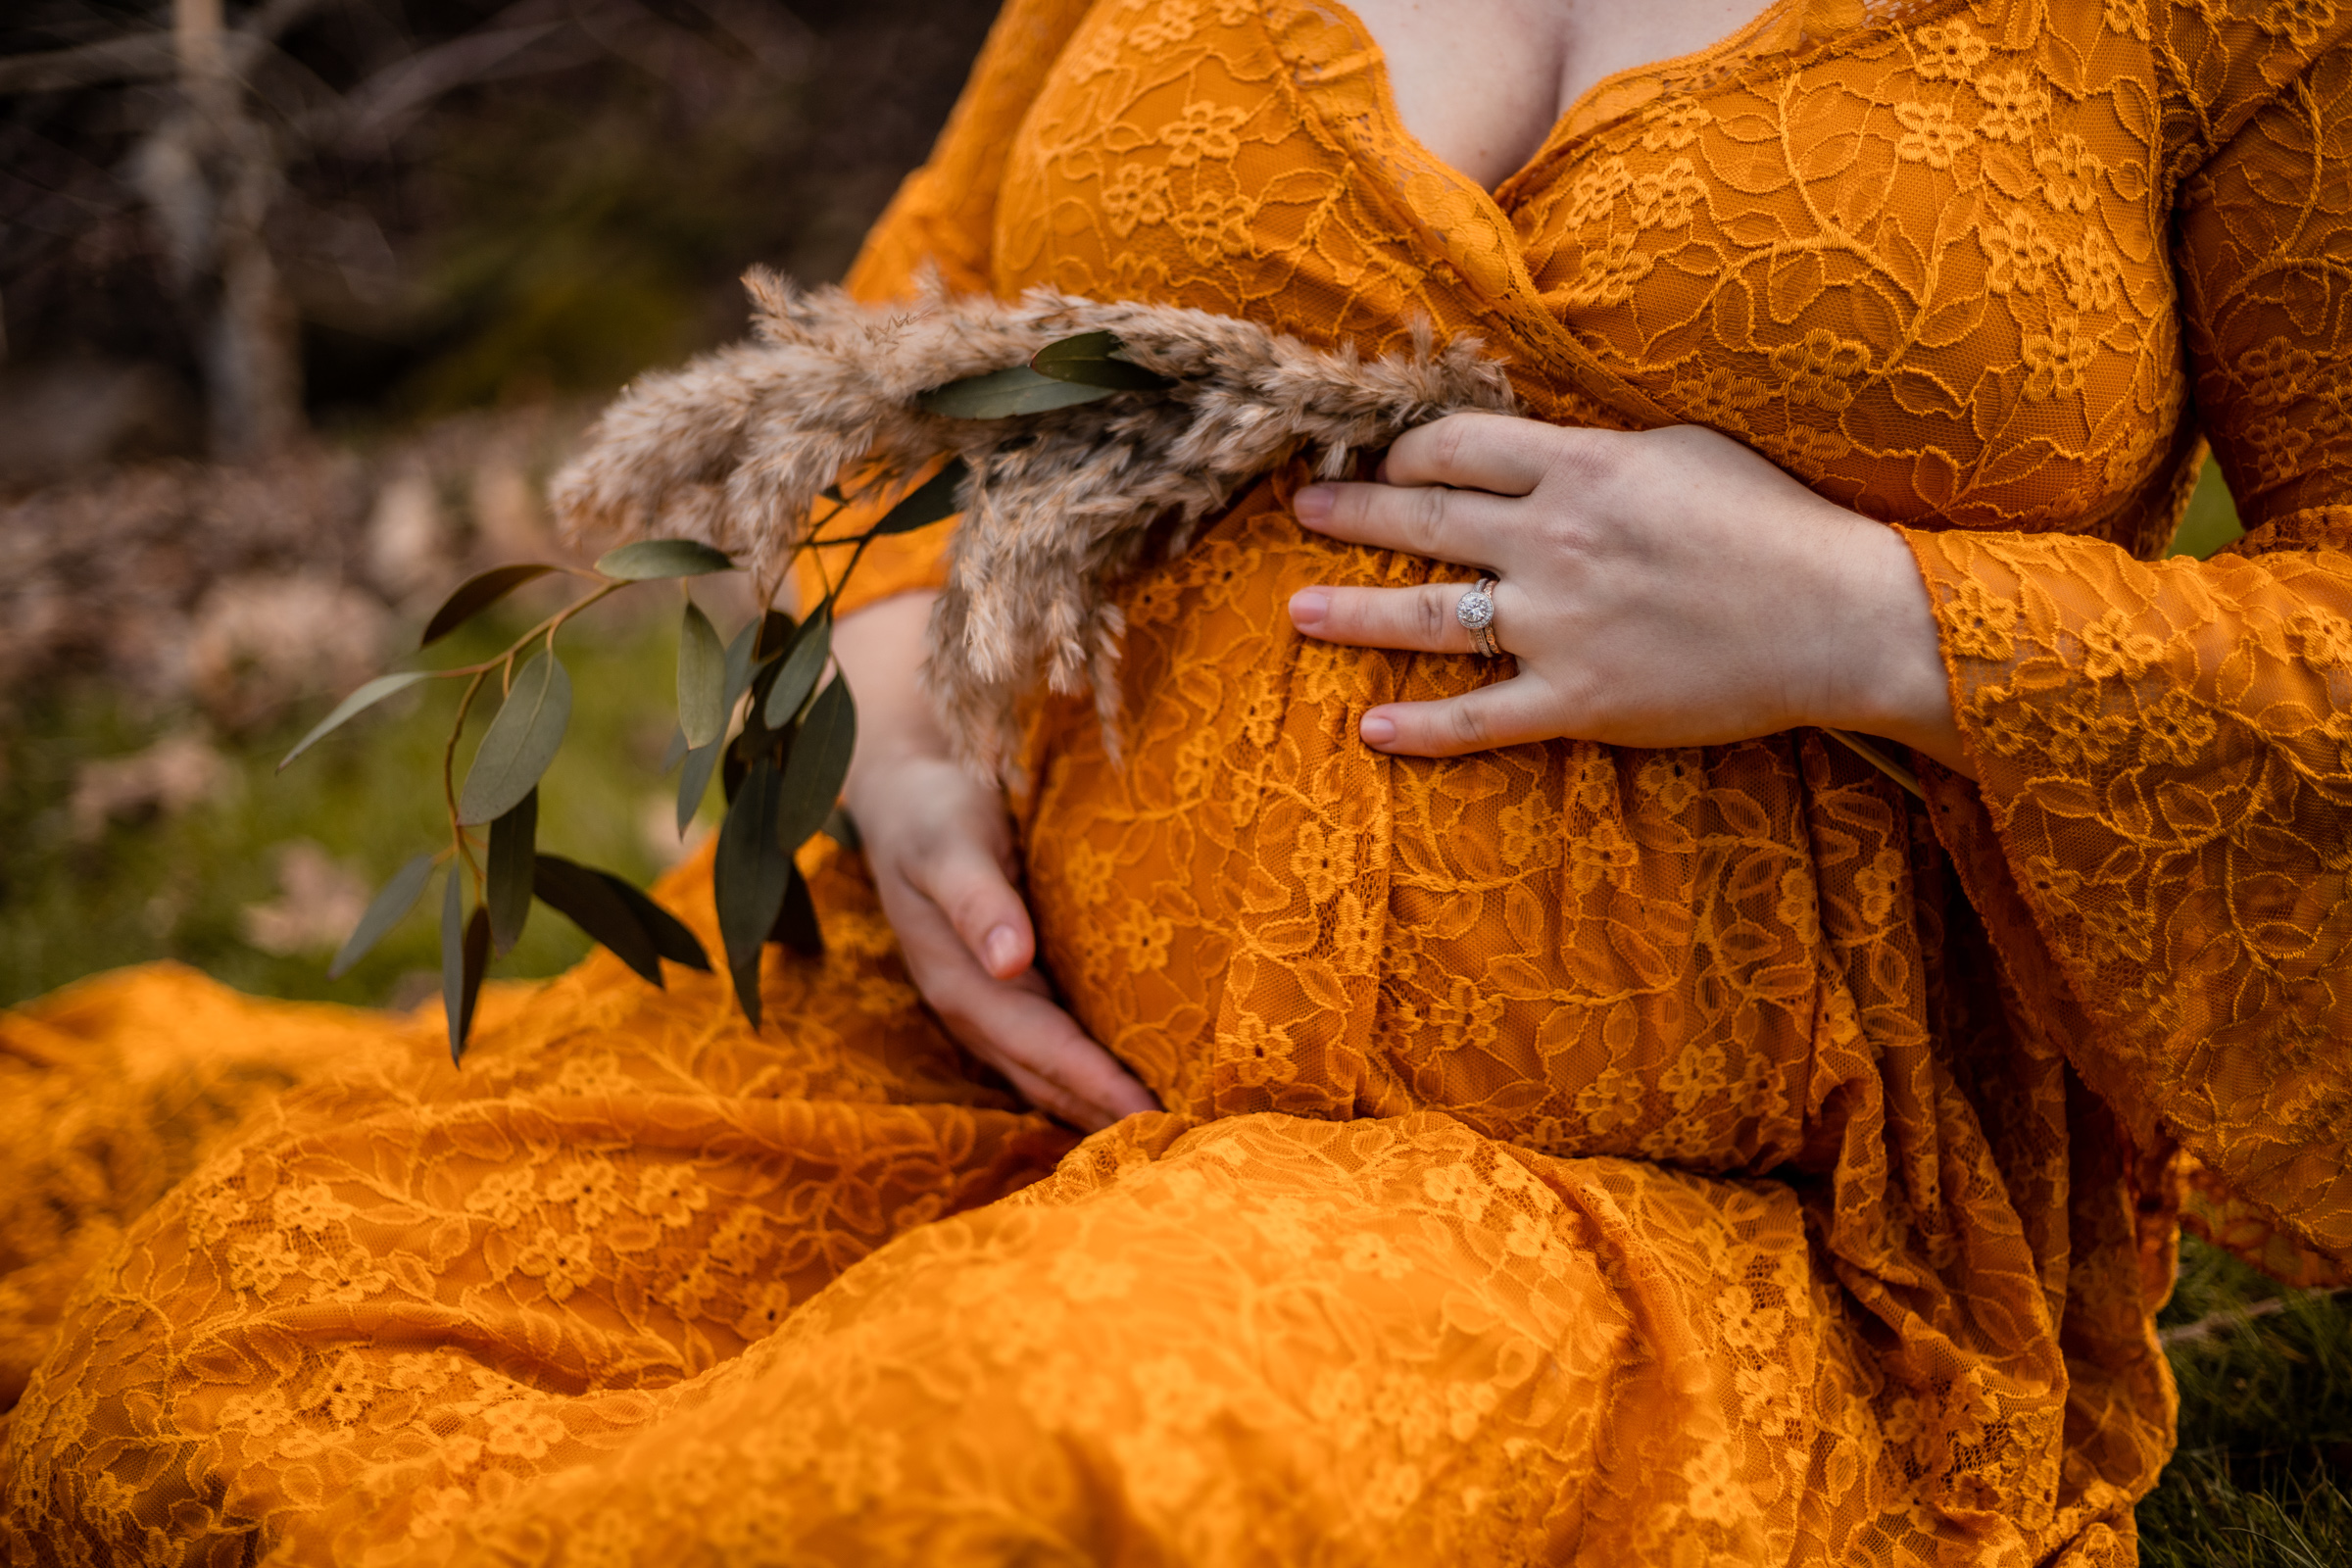 Pregnant belly captured during maternity photos